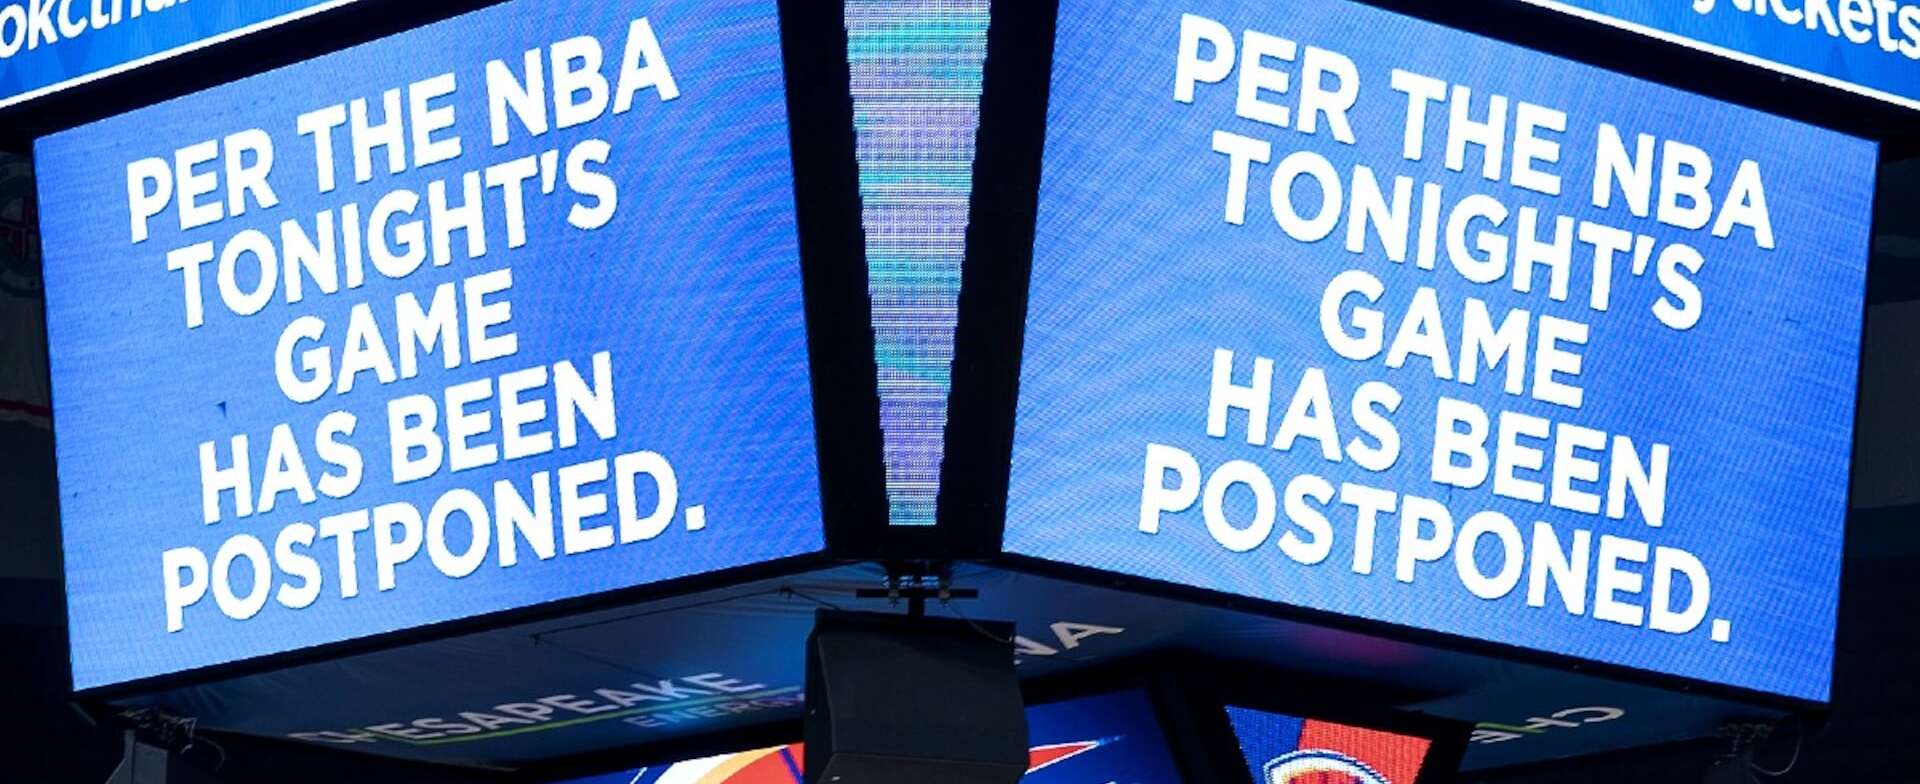 How concerned are you about an NBA restart?